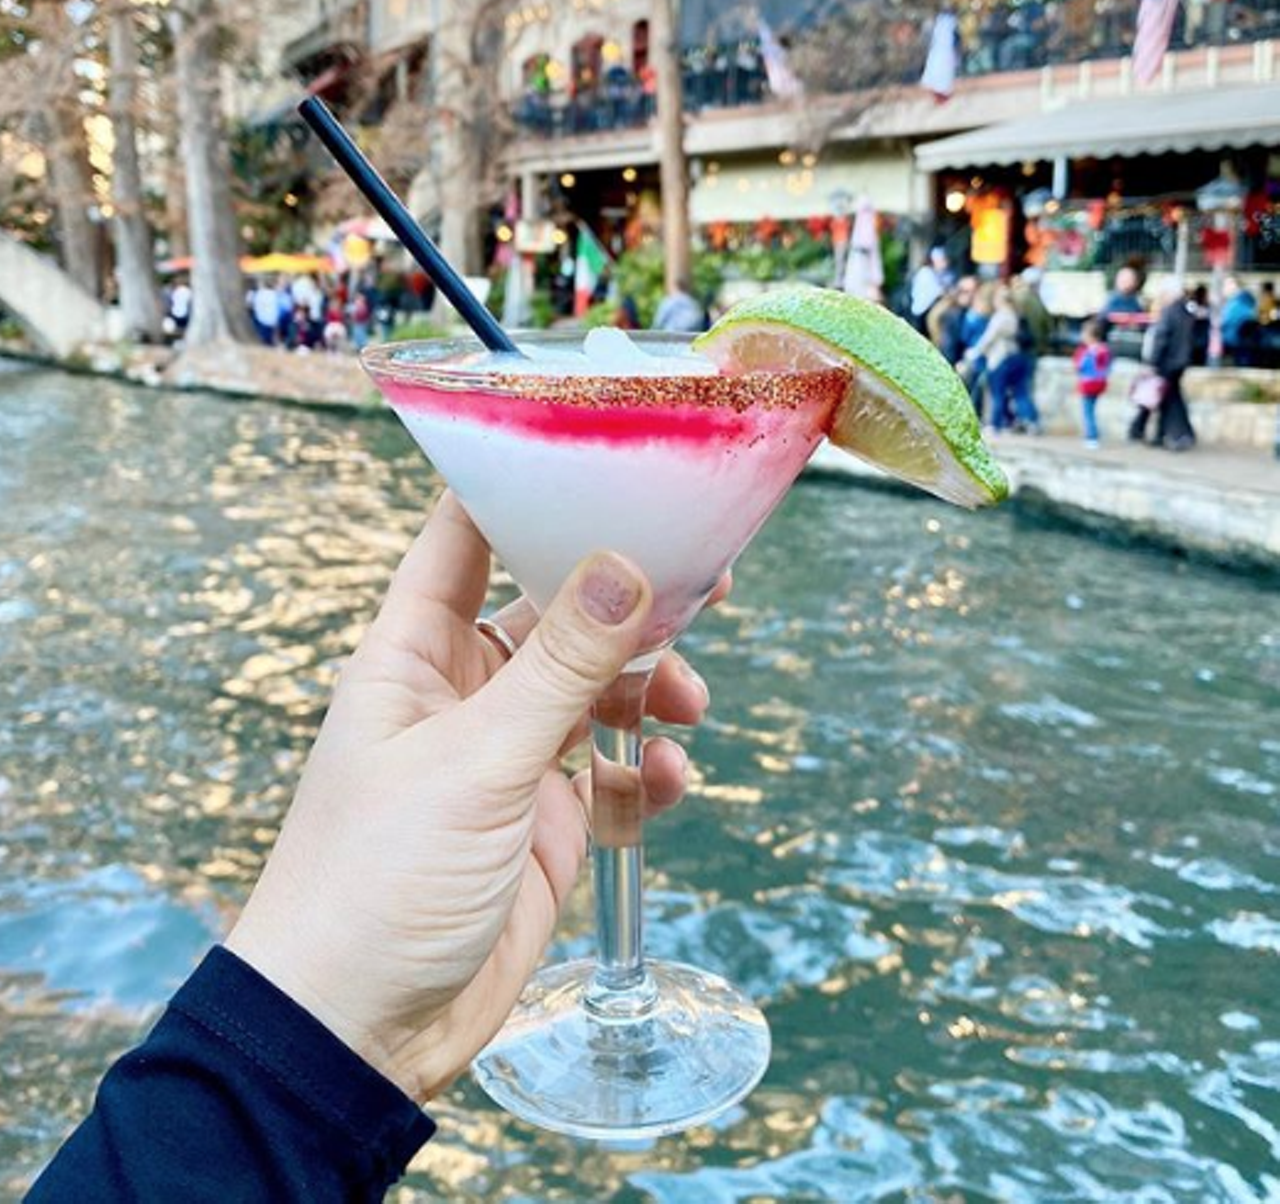 Boudro's on the Riverwalk
421 E Commerce St, (210) 224-8484, boudros.com
Boudro’s isn’t just regarded as one of the hottest restaurants in the city, it’s also home to one of the best margaritas — the prickly pear margarita to be exact. Be sure to make it taste all the more better with the famed tableside guacamole.
Photo via Instagram / withshayda